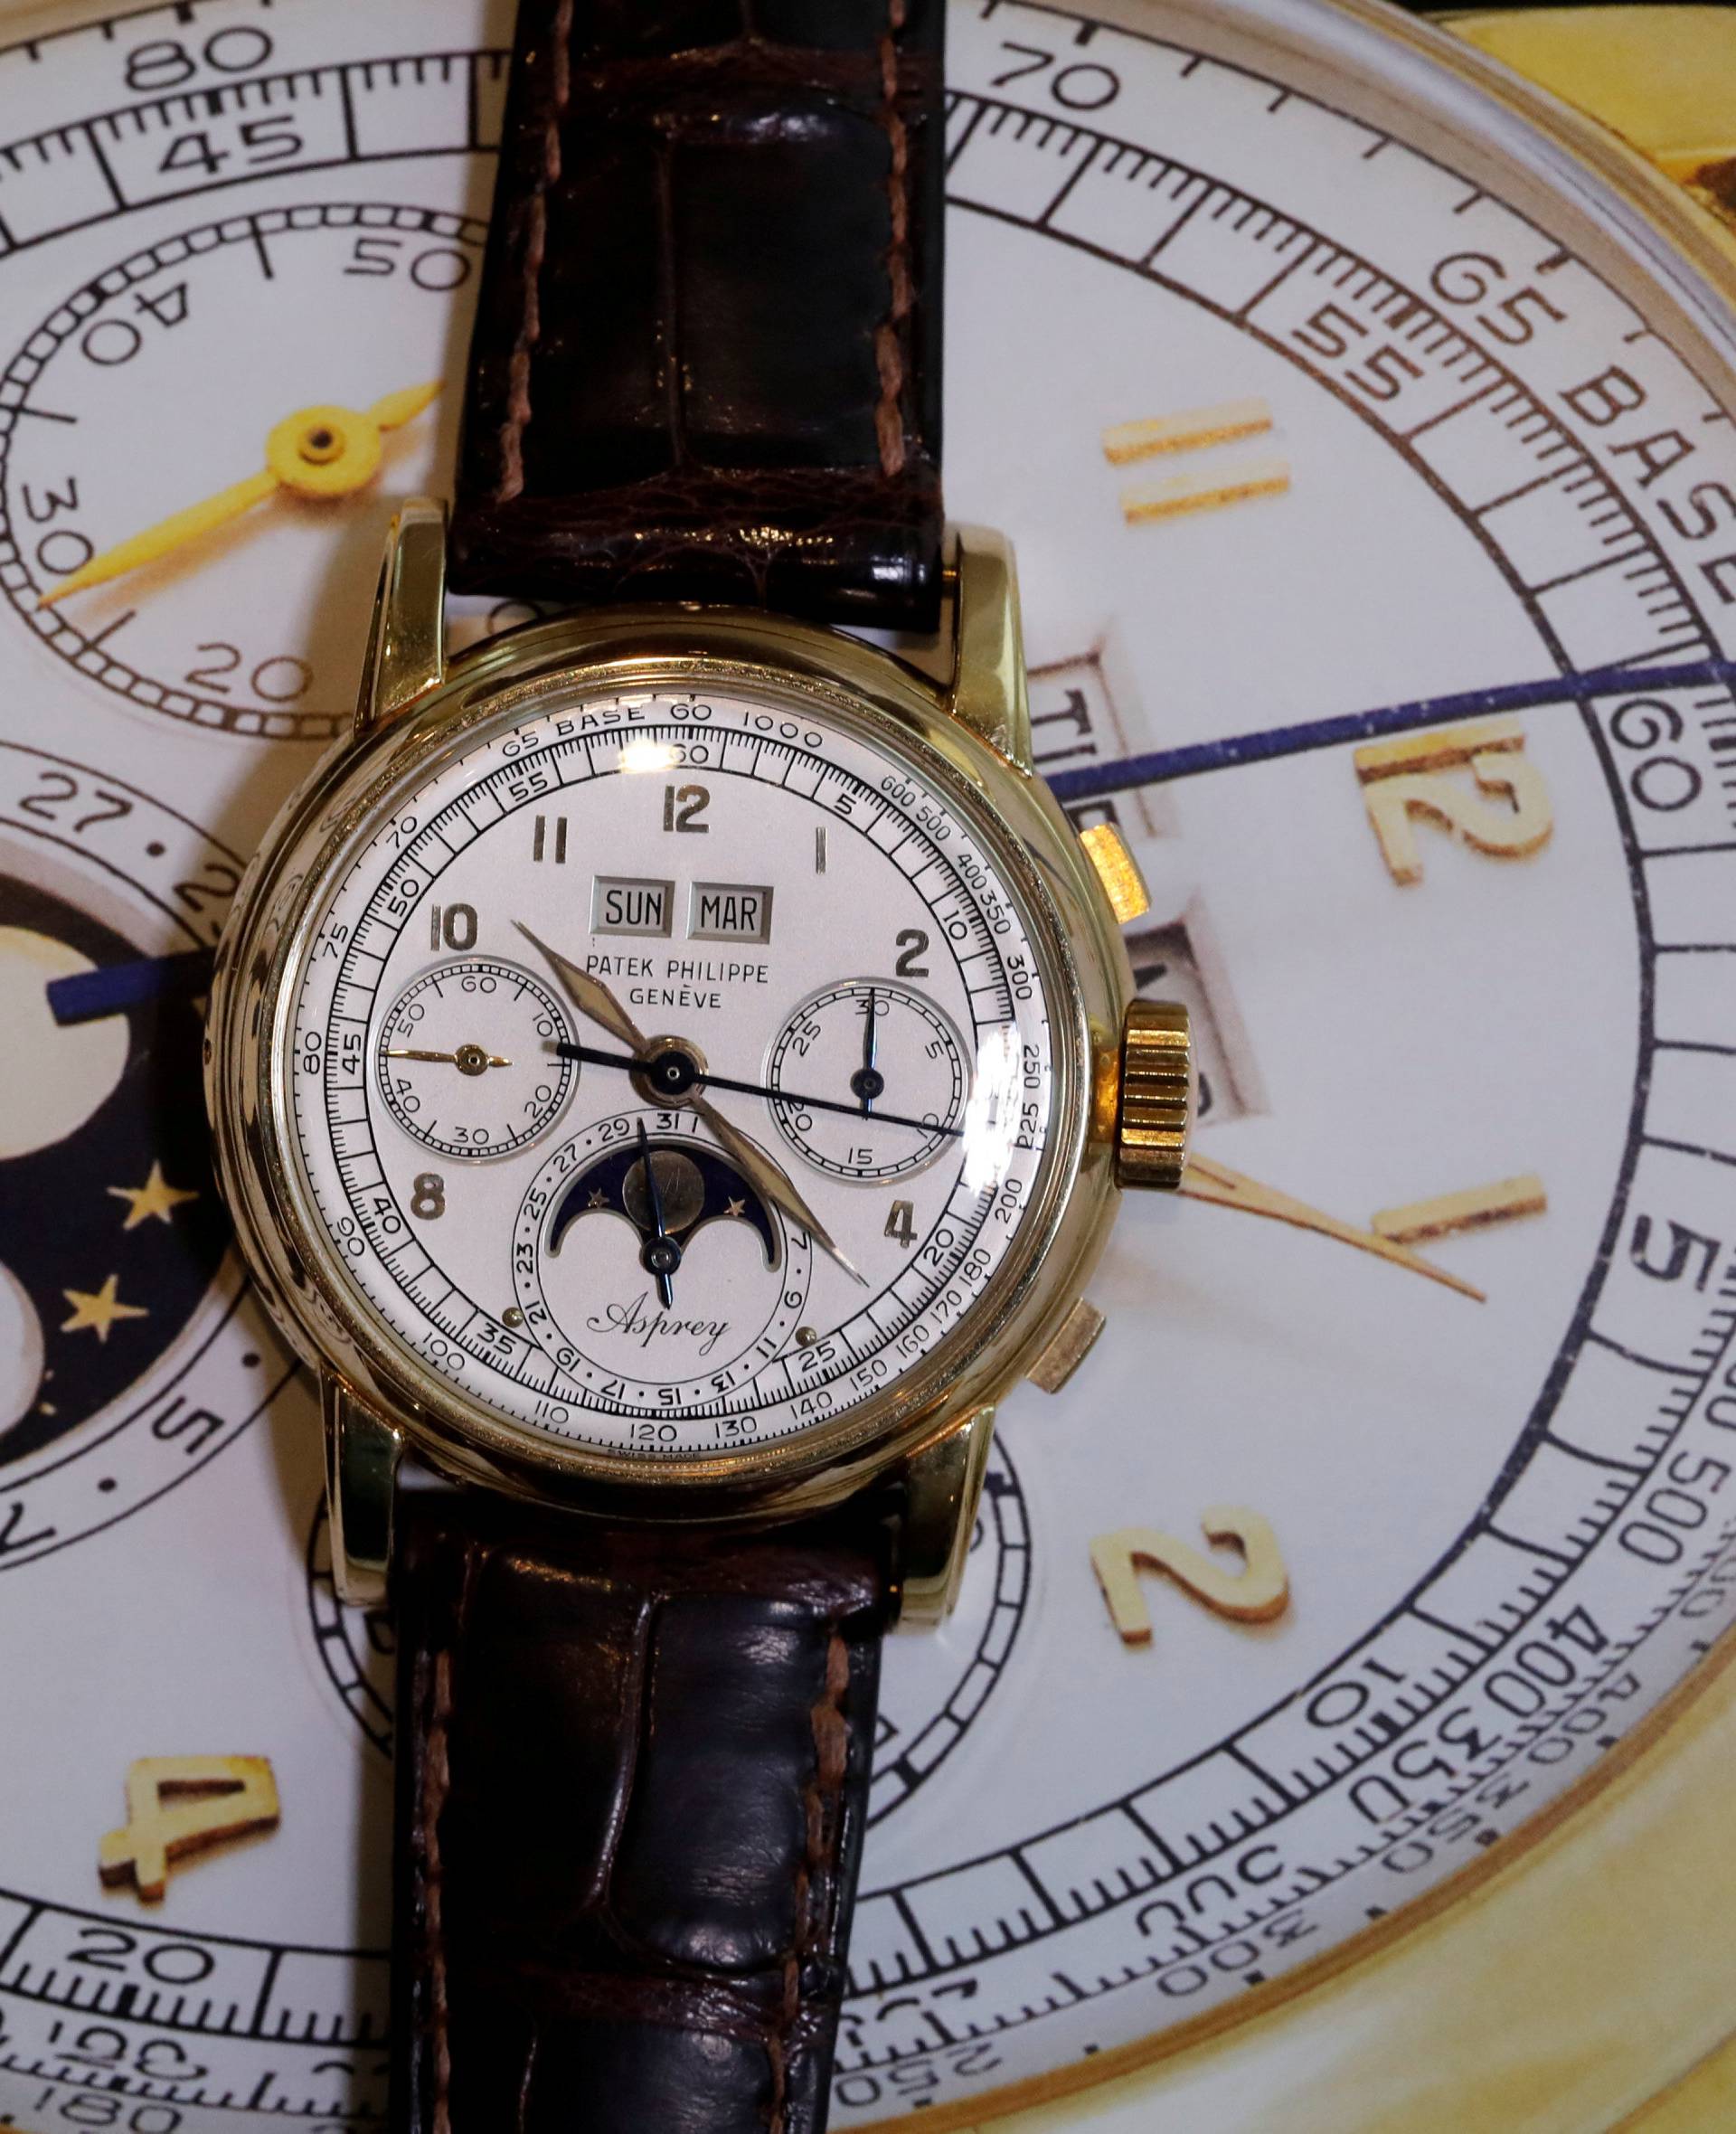 FILE PHOTO: "The Asprey", a Patek Philippe perpetual calendar chronograph watch reference 2499, is pictured in Geneva